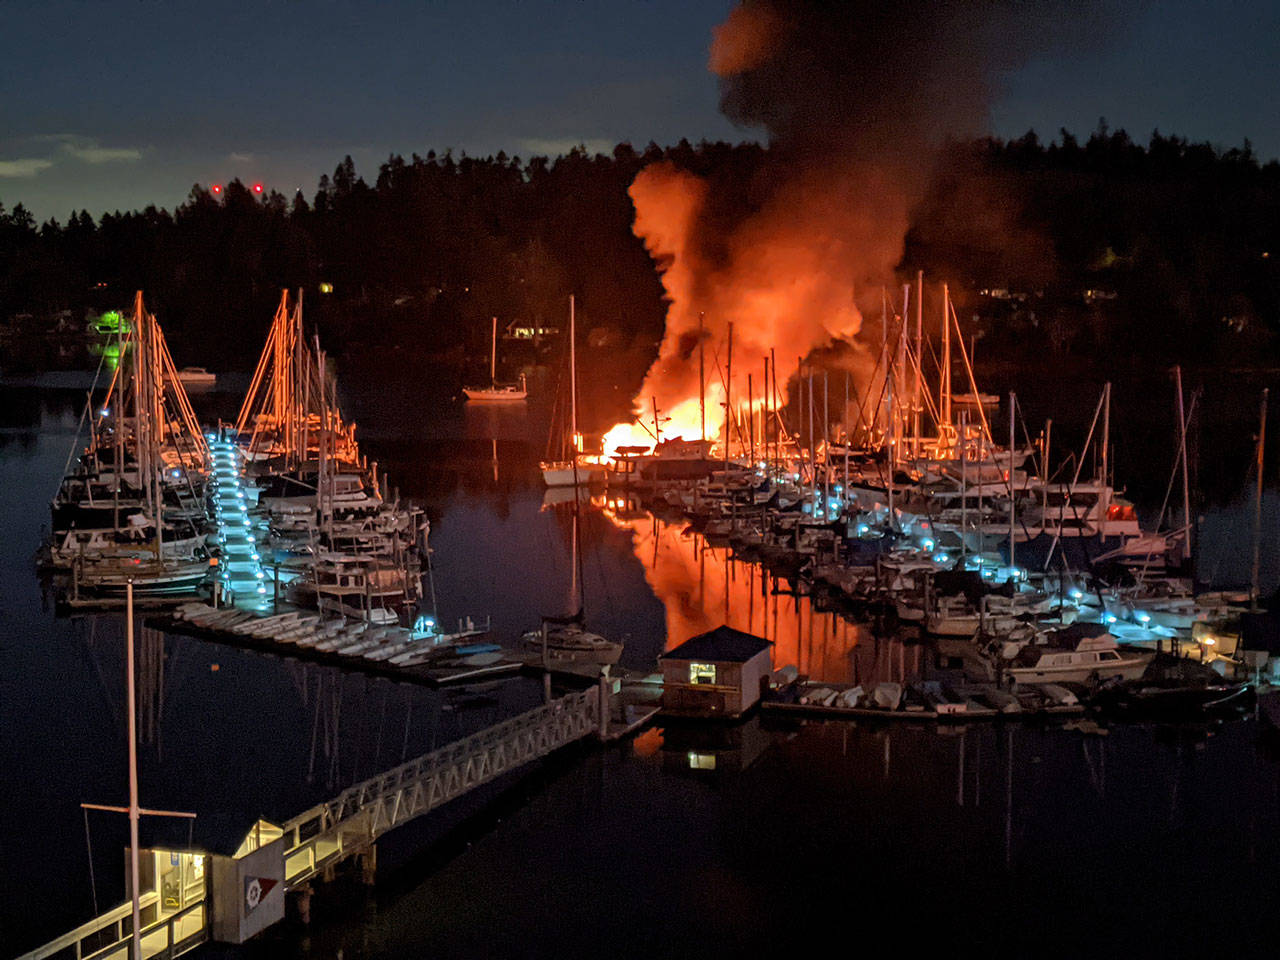 After an explosion shook Burton early Monday morning, two 40-foot fiberglass vessels caught fire and sunk. The cold weather made the Quartermaster Marina dock slippery for firefighters putting out the fire (Matt Wilson Photo).